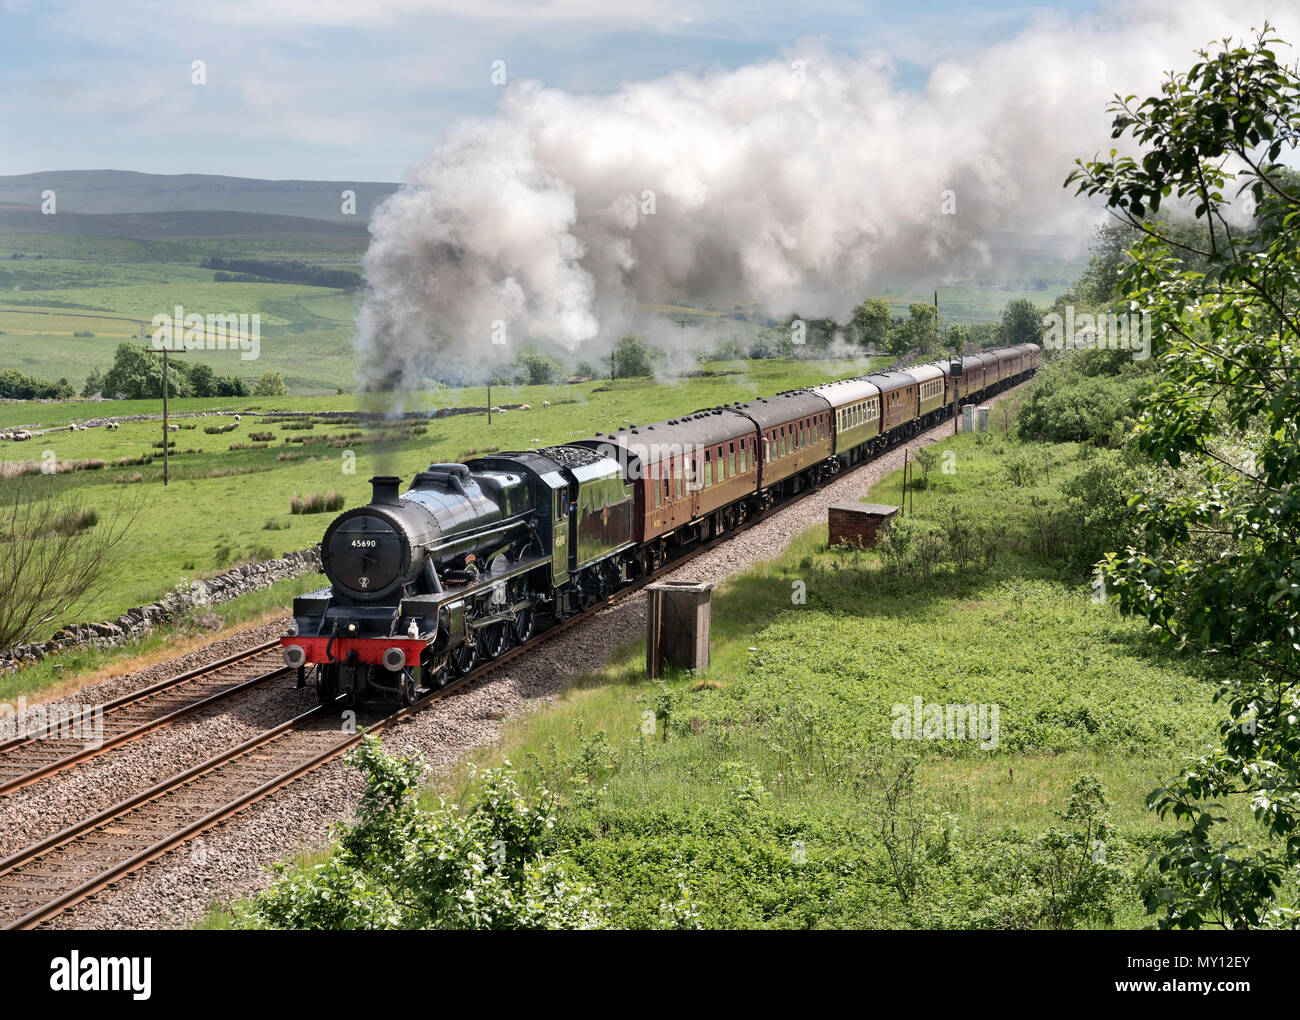 Ribblehead, UK. 5th June, 2018. The Dalesman steam special passes Saltlake Cottages on the uphill gradient near Ribblehead on the Settle-Carlisle railway line, 5th June 2018. The train is a regular feature on the line during Summer months. The locomotive here is a Stanier Jubilee Class engine named 'Leander'. Credit: John Bentley/Alamy Live News Stock Photo